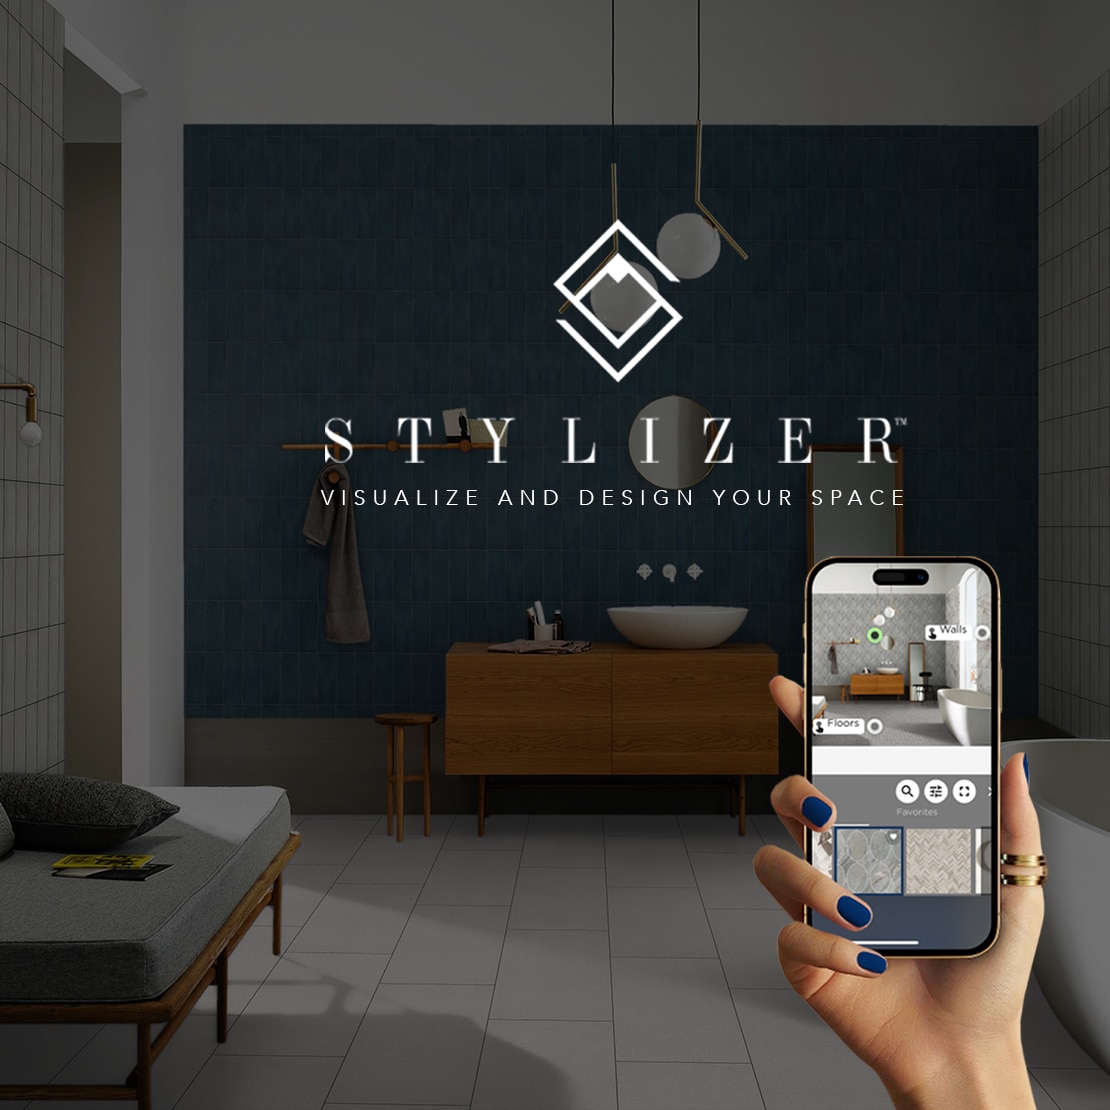 Stylizer: Visualize and Design Your Space